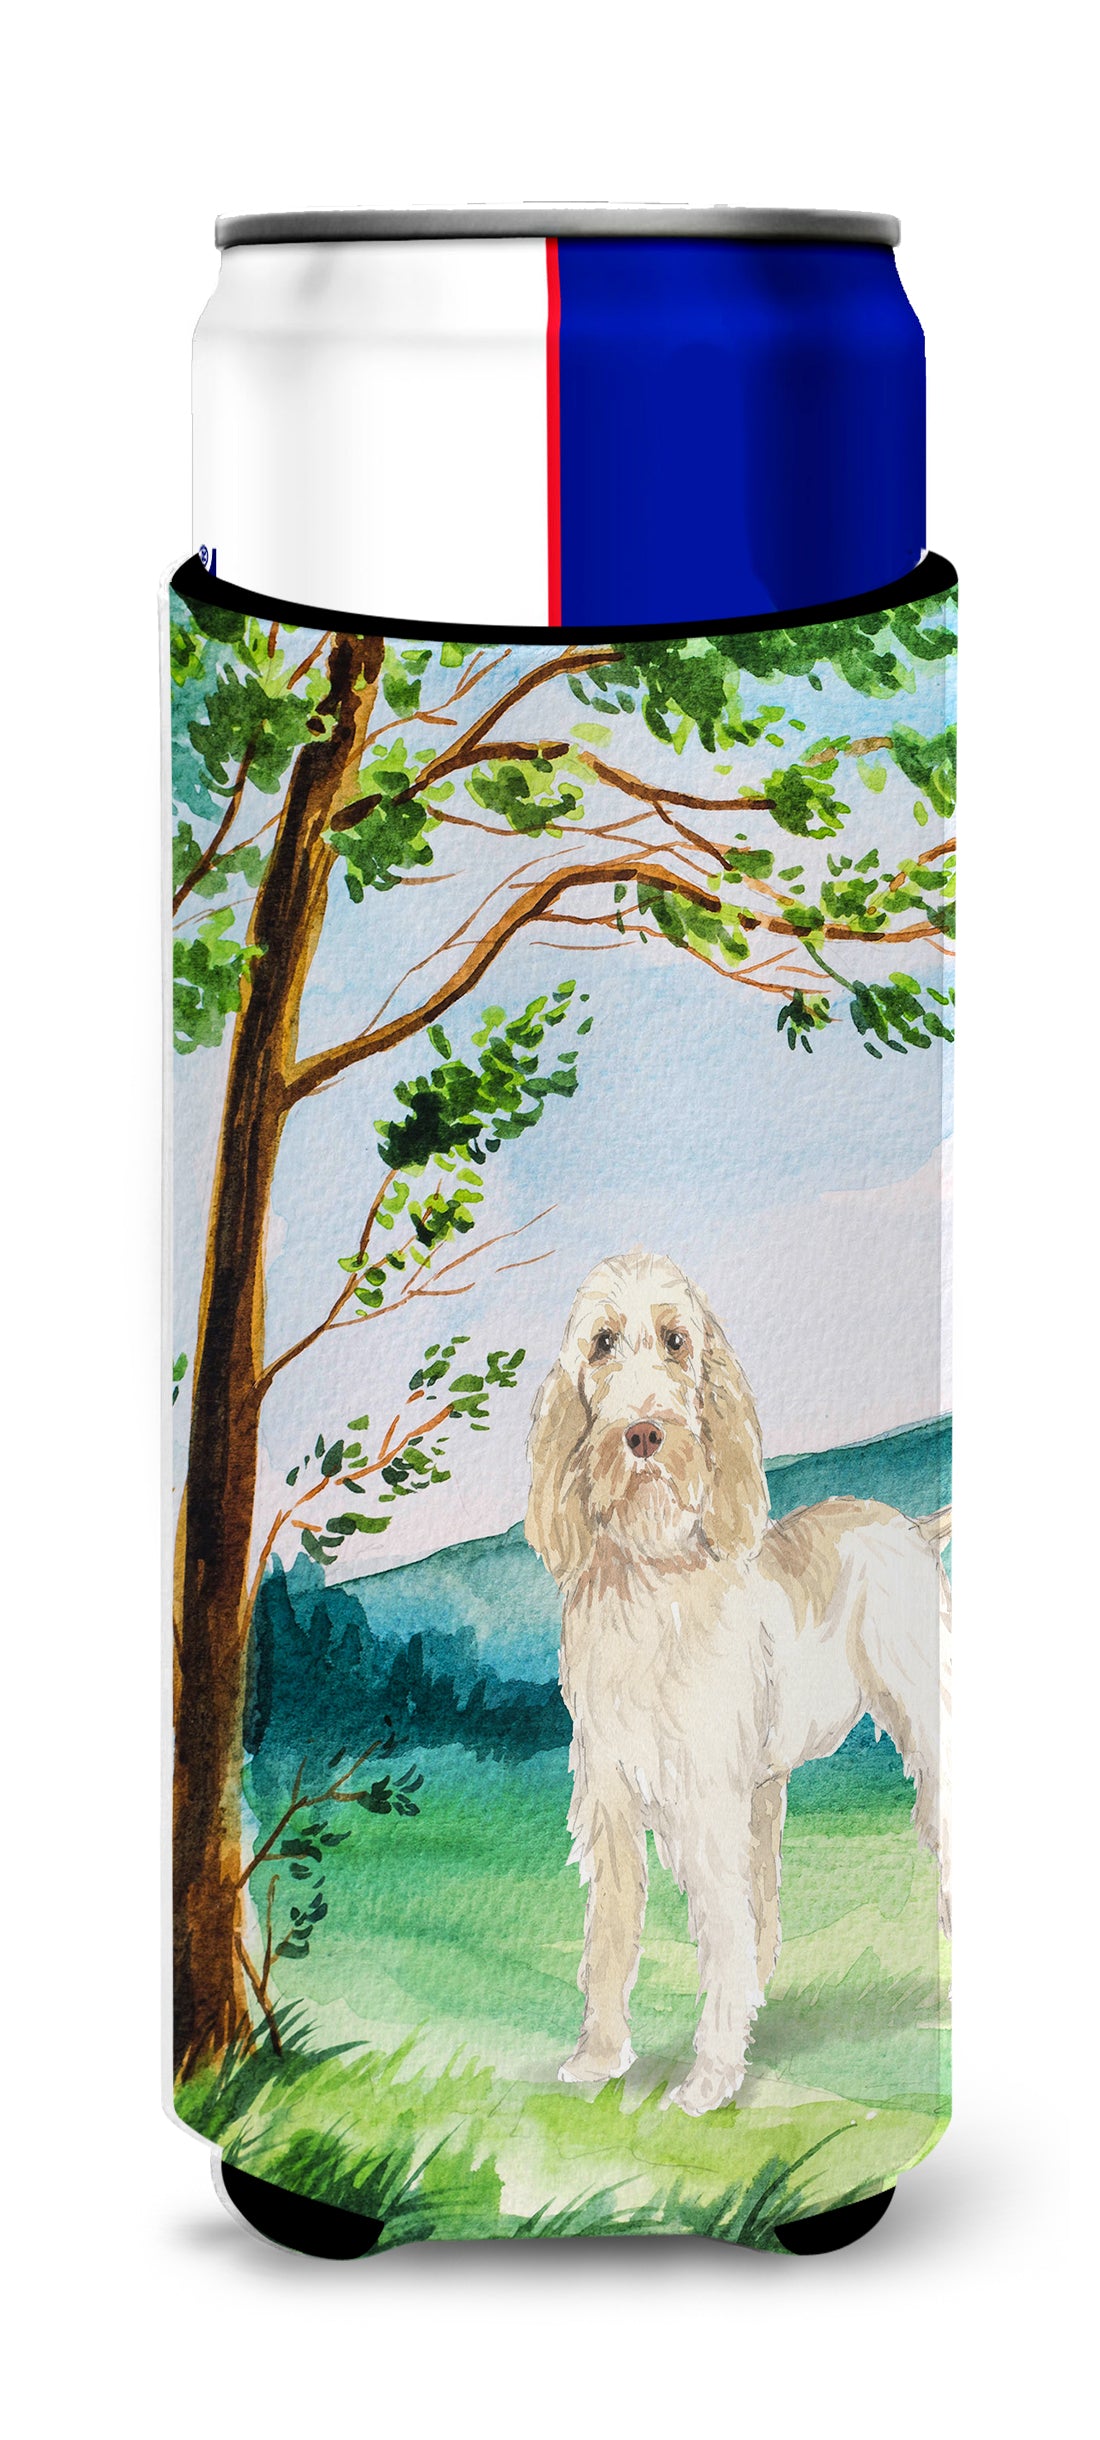 Under the Tree Spinone Italiano  Ultra Hugger for slim cans CK2554MUK